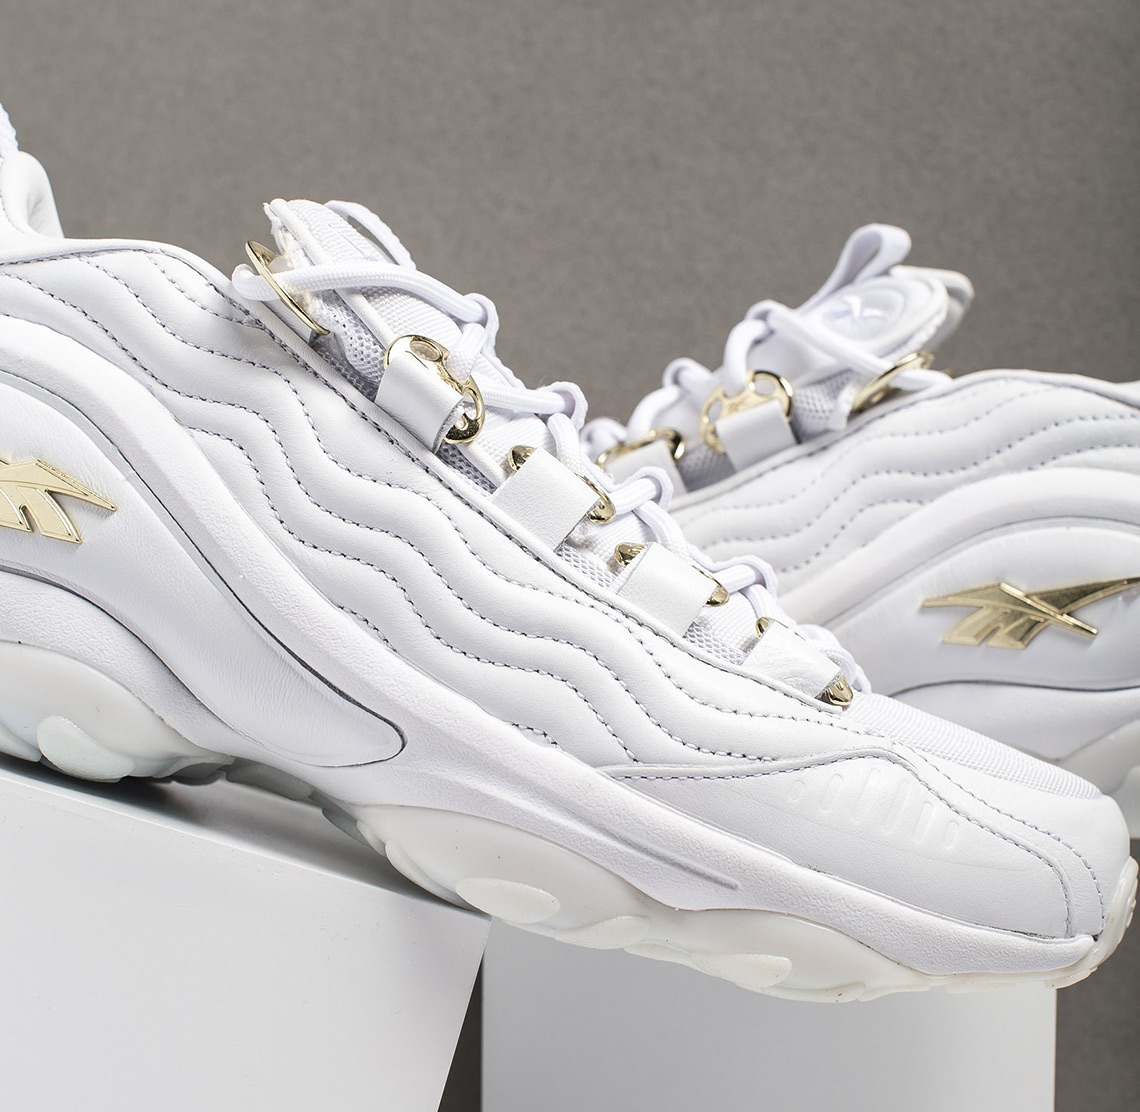 Reebok Dmx Run 10 Leather Gold Available Now 2